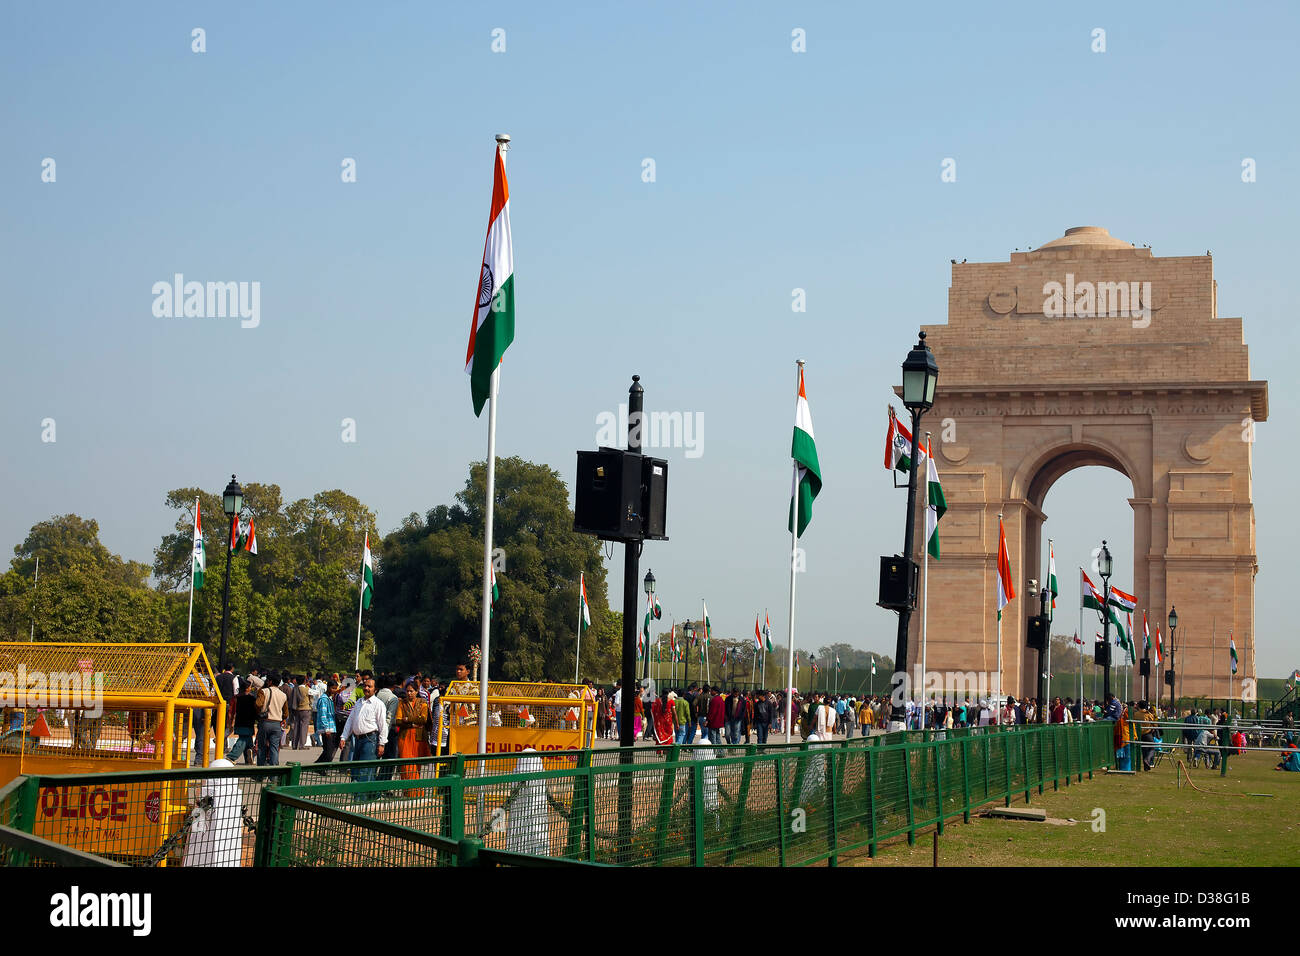 India Gate,People,War Memorial,Travel Destinations,Monument,Architecture And Buildings,Travel,Capital Cities,City, Sandstone Stock Photo